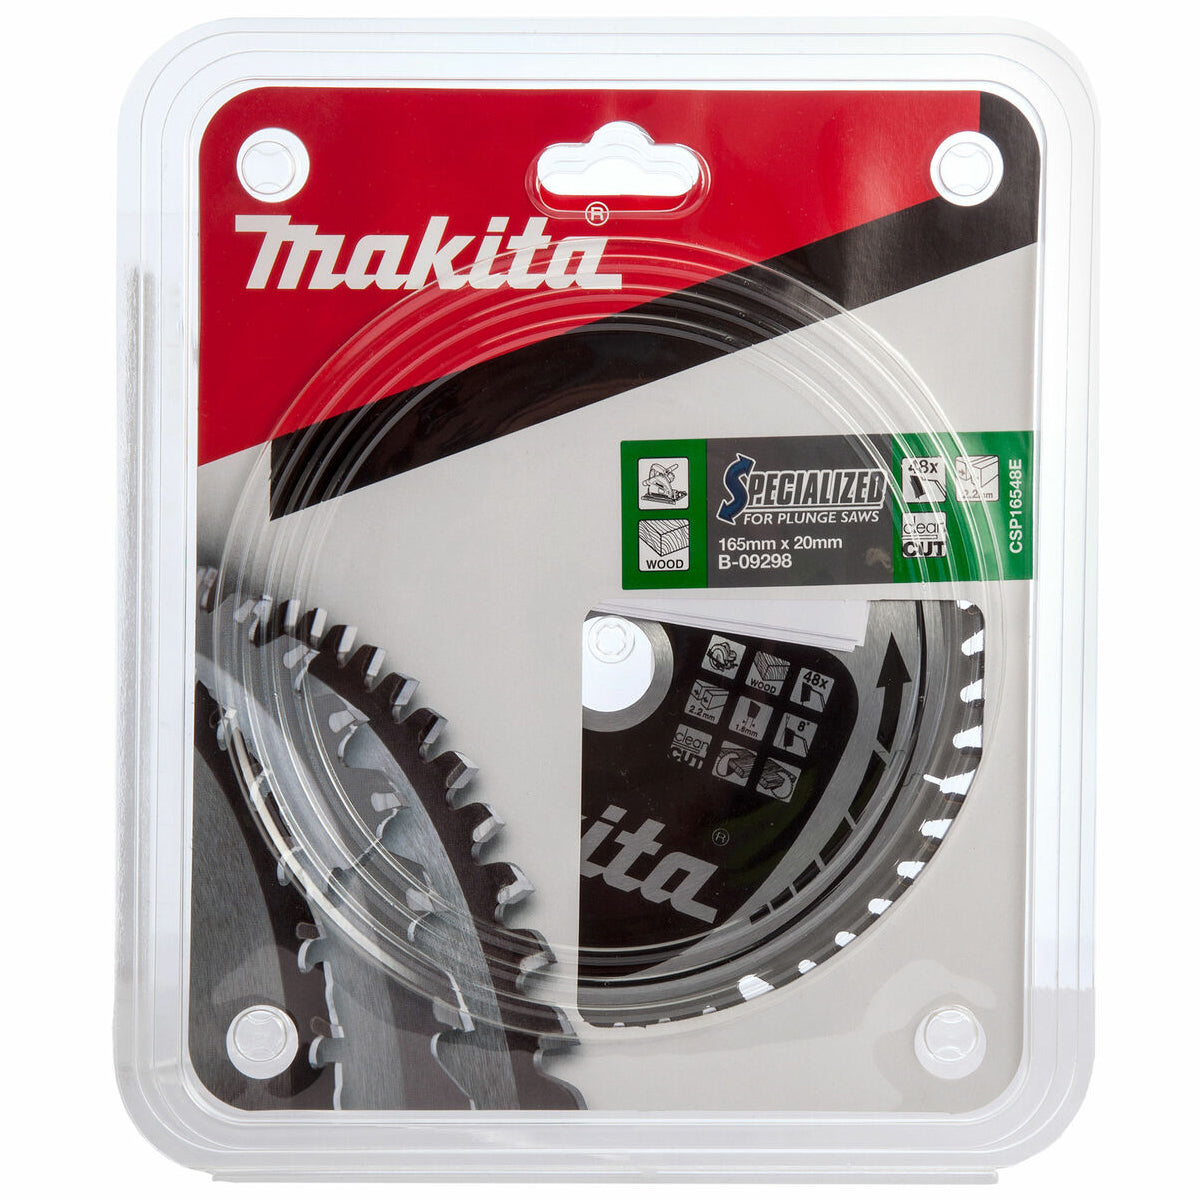 Makita 165mm 48T Wood Specialized Plunge Saw Blade B-33015